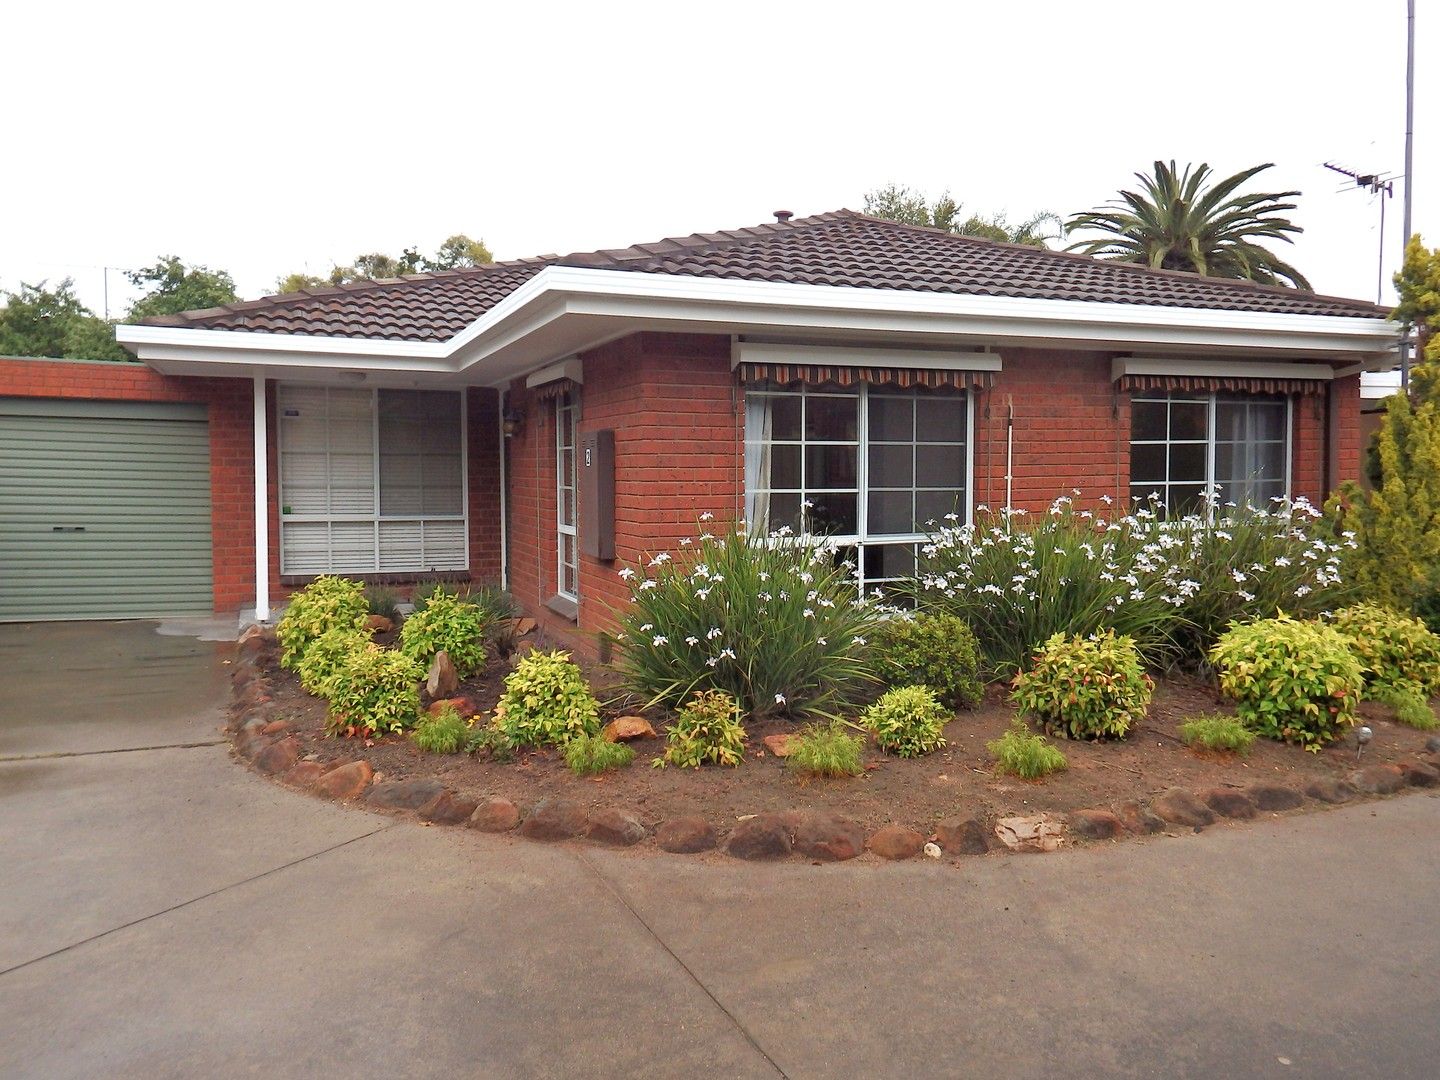 2 bedrooms Apartment / Unit / Flat in 2/50 Corio st SHEPPARTON VIC, 3630